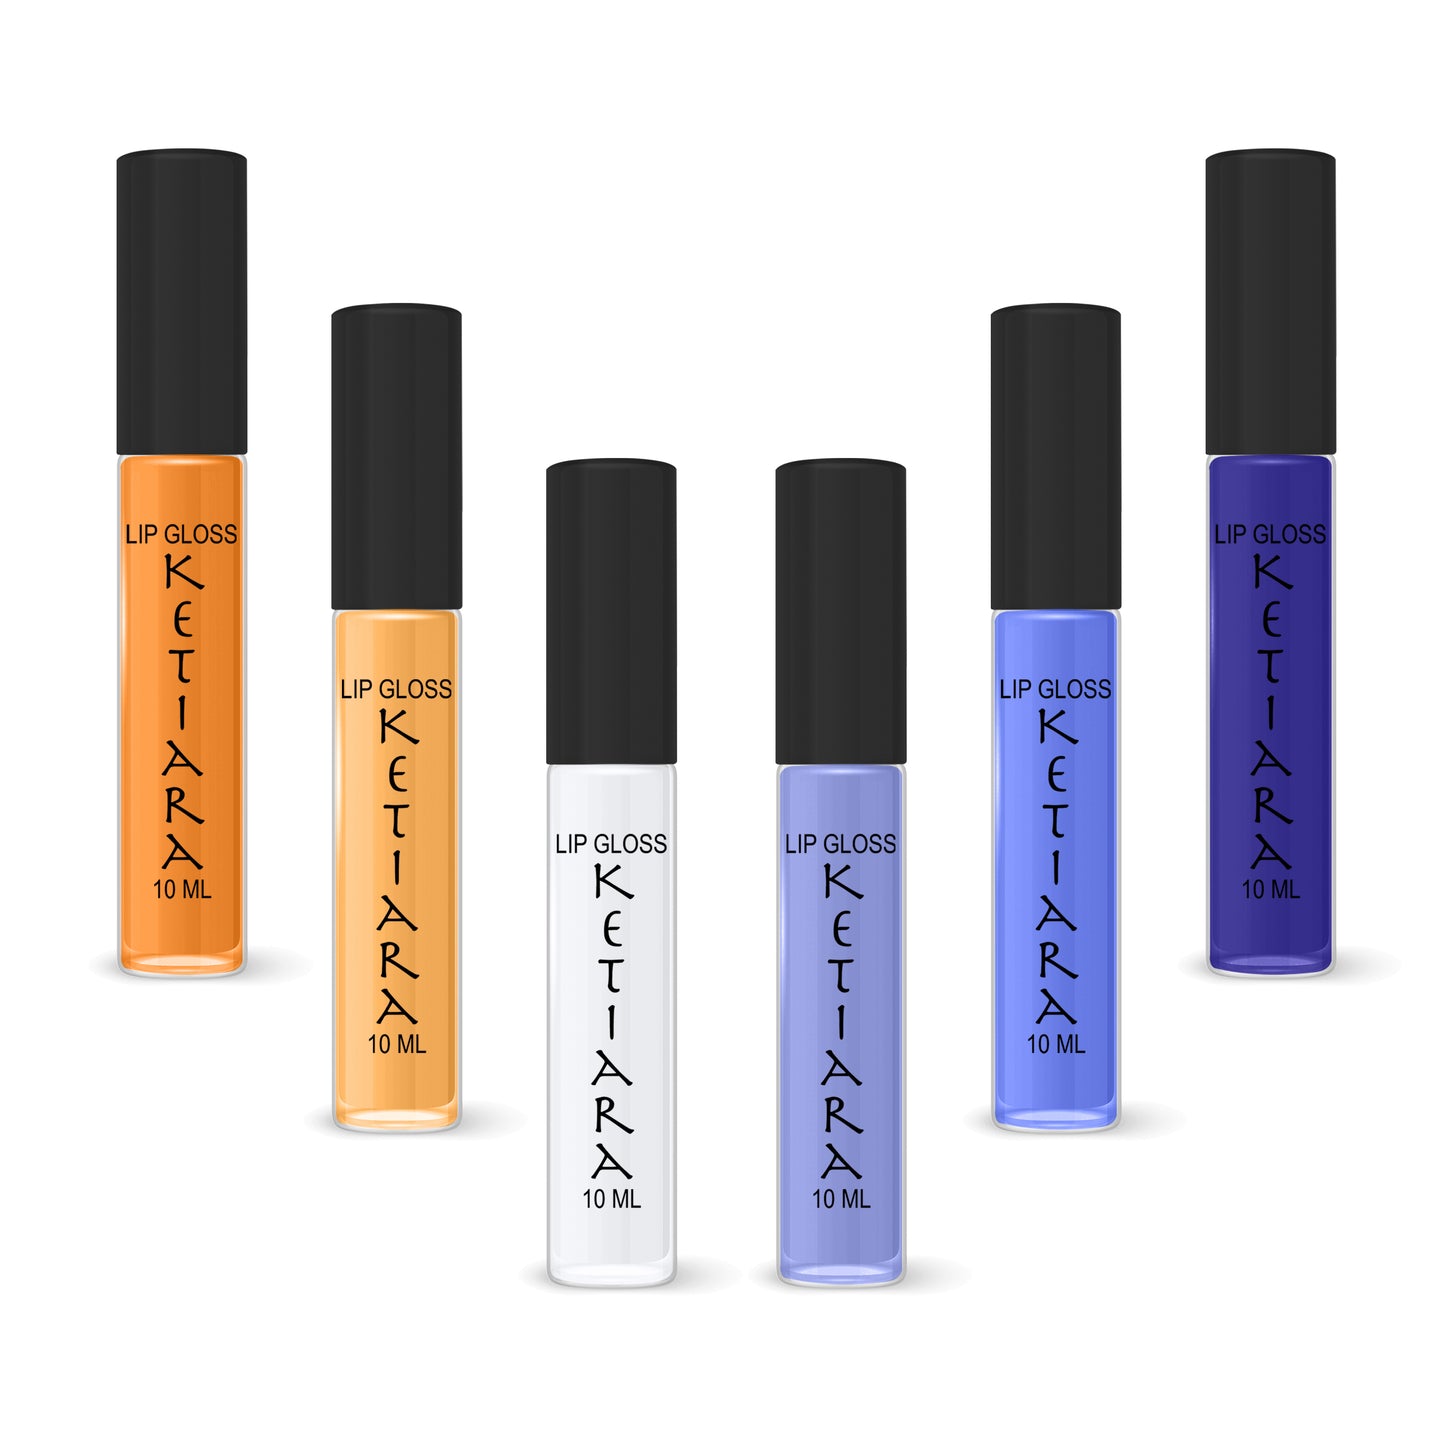 Orange Dream Hydrating And Moisturizing Non-sticky Premium Mild Tinting Lip Gloss Infused With Hyaluronic Acid | Pack Of 6